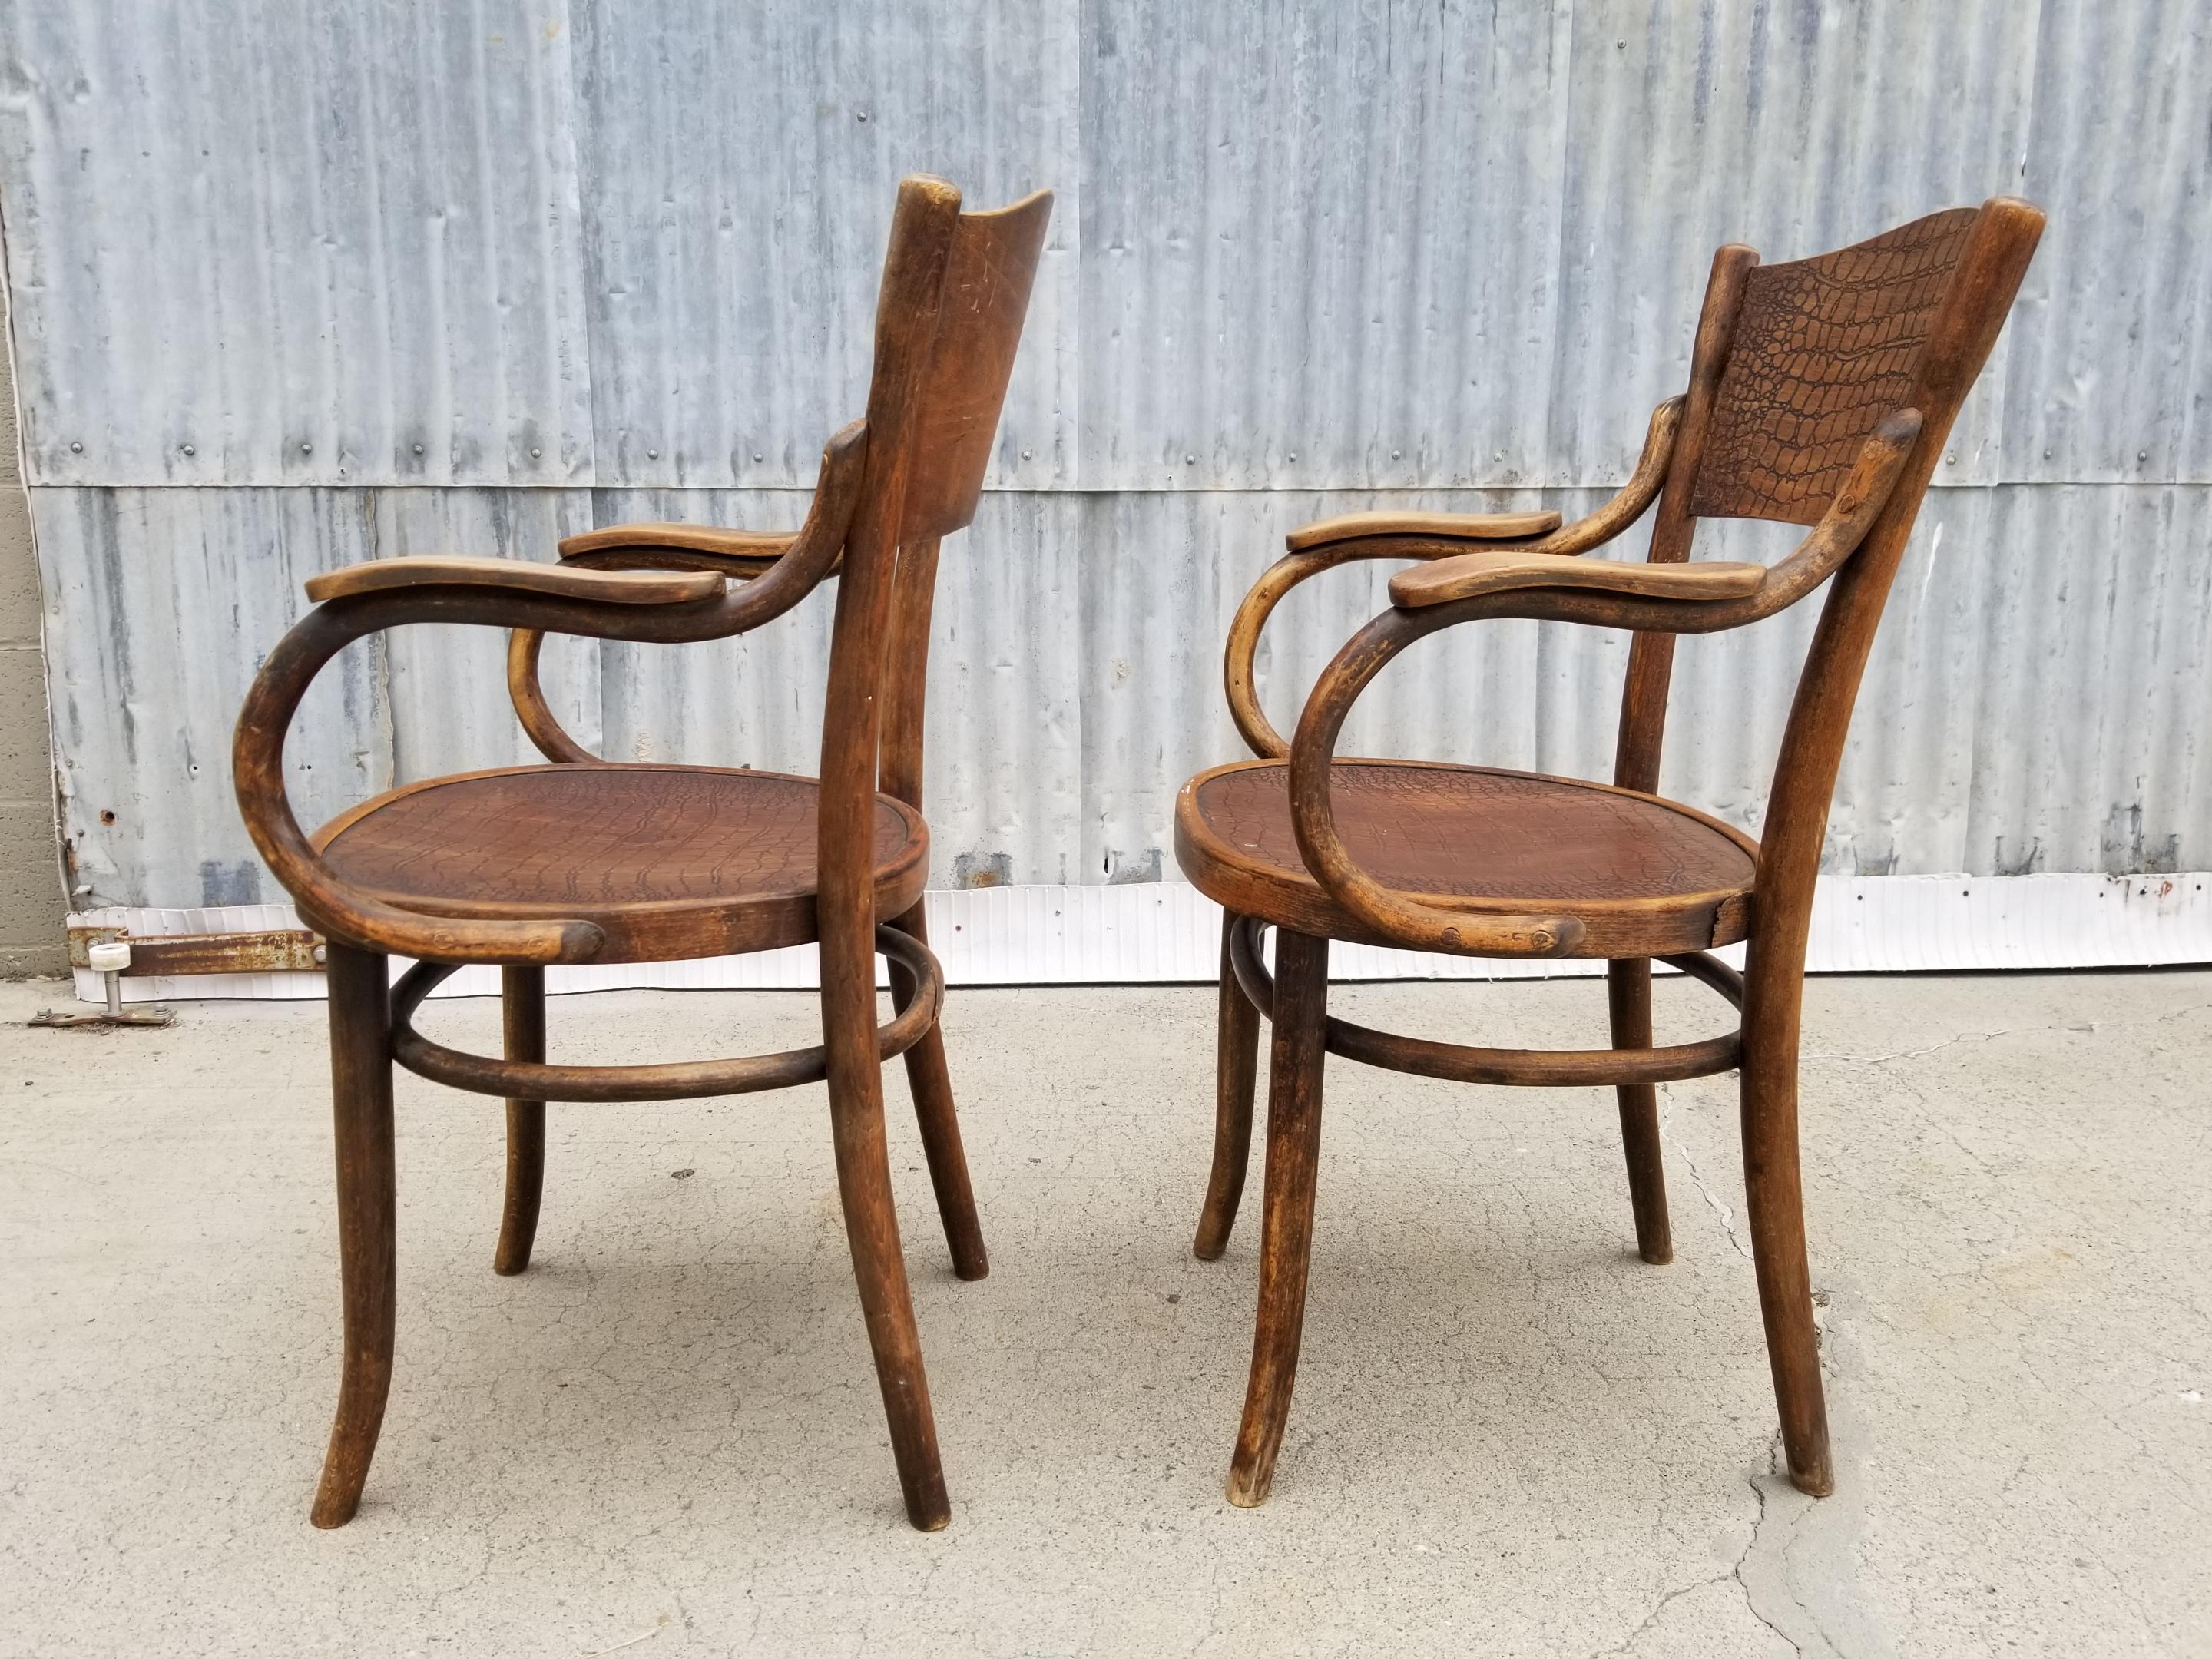 Rustic Pair of Thonet Bentwood Chairs, Early 20th Century